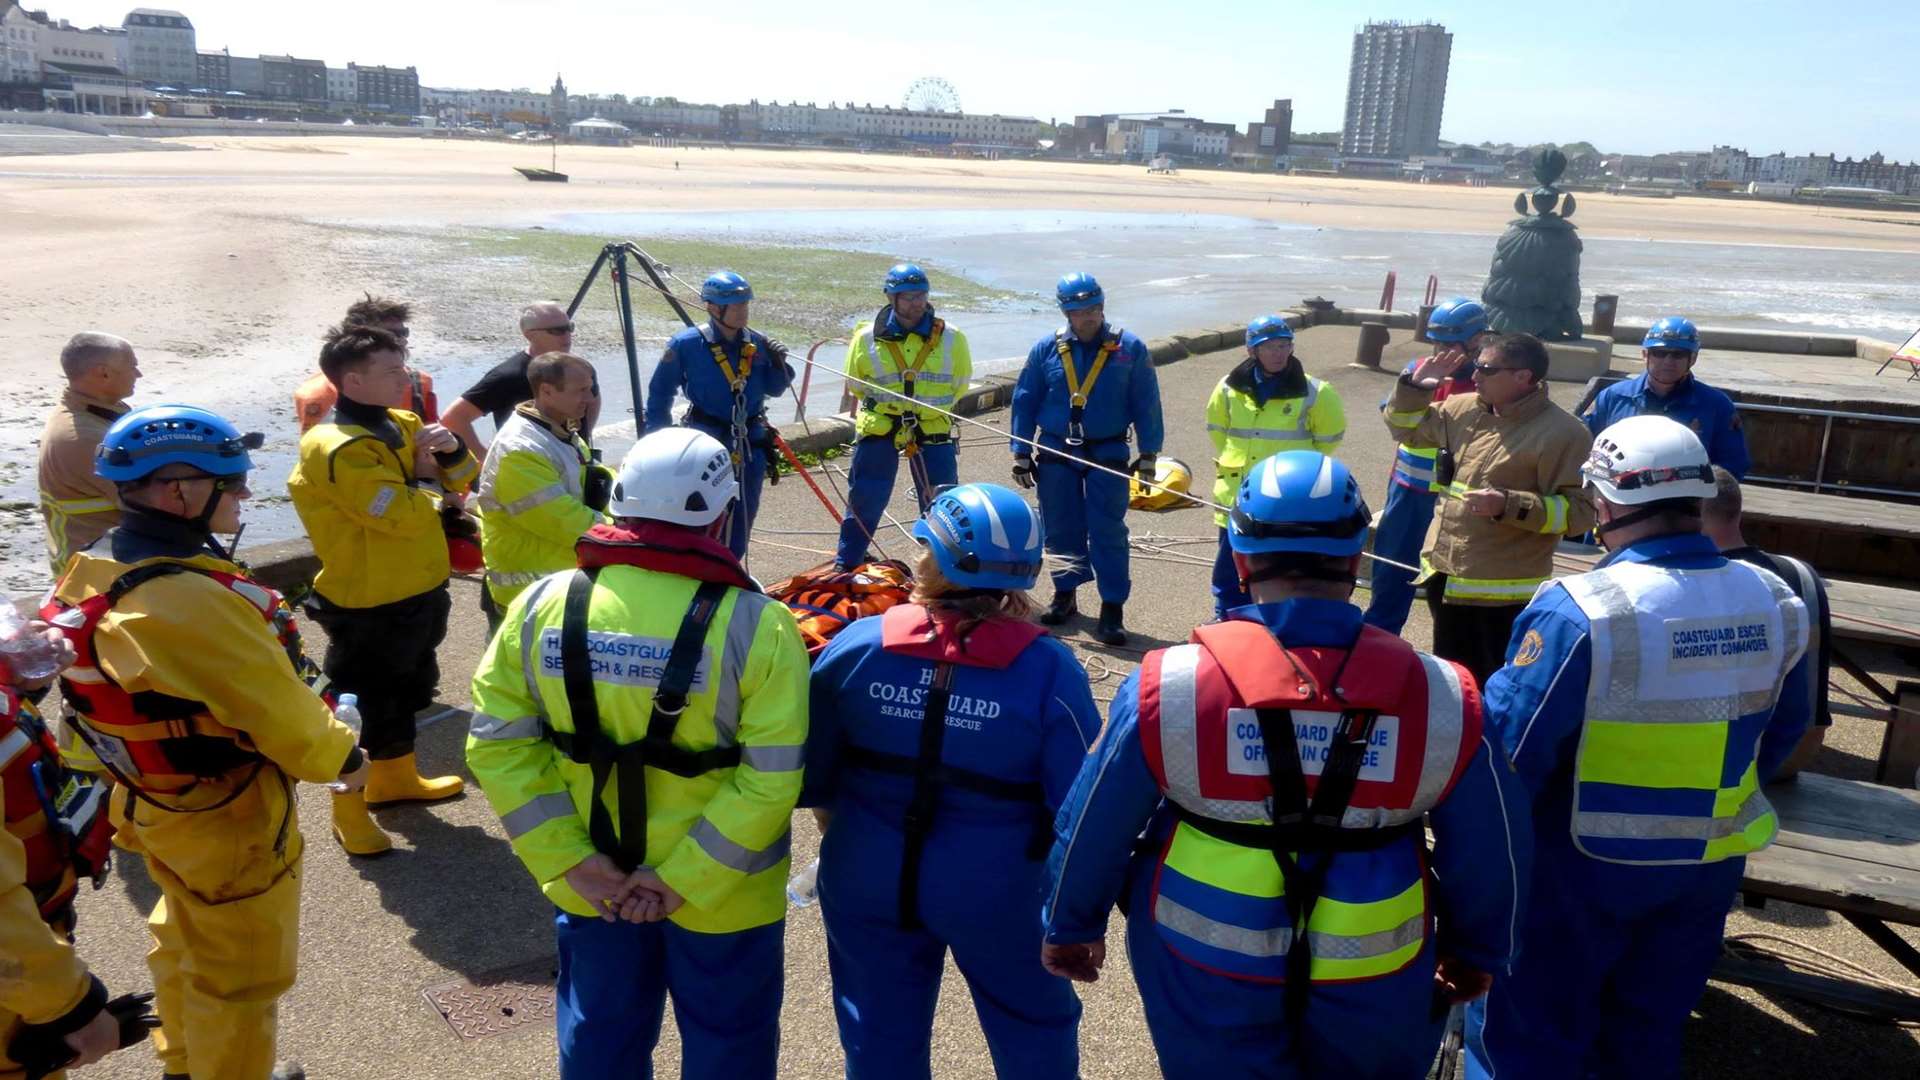 KFRS, Coastguard and Kent Police in briefing for the training exercise